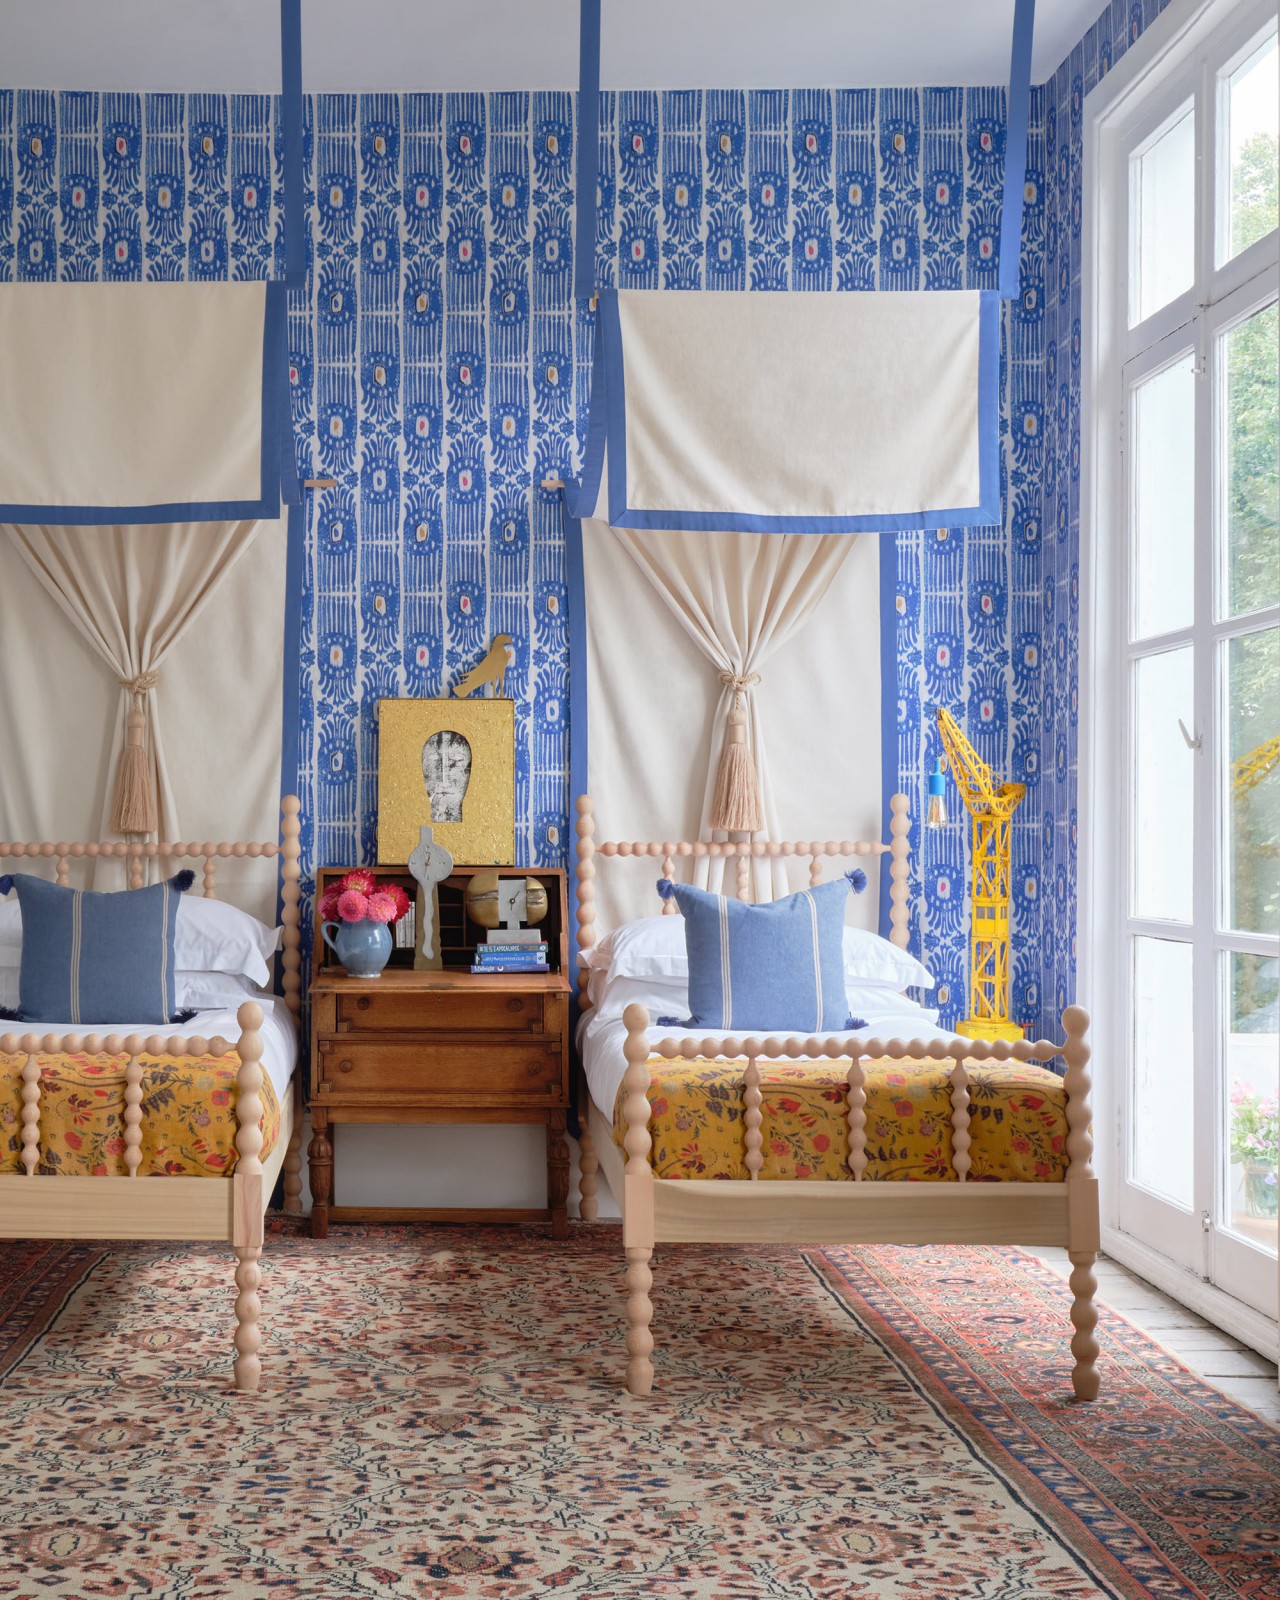 A bedroom with MindtheGap's Ikat Carnical wallpaper on the walls